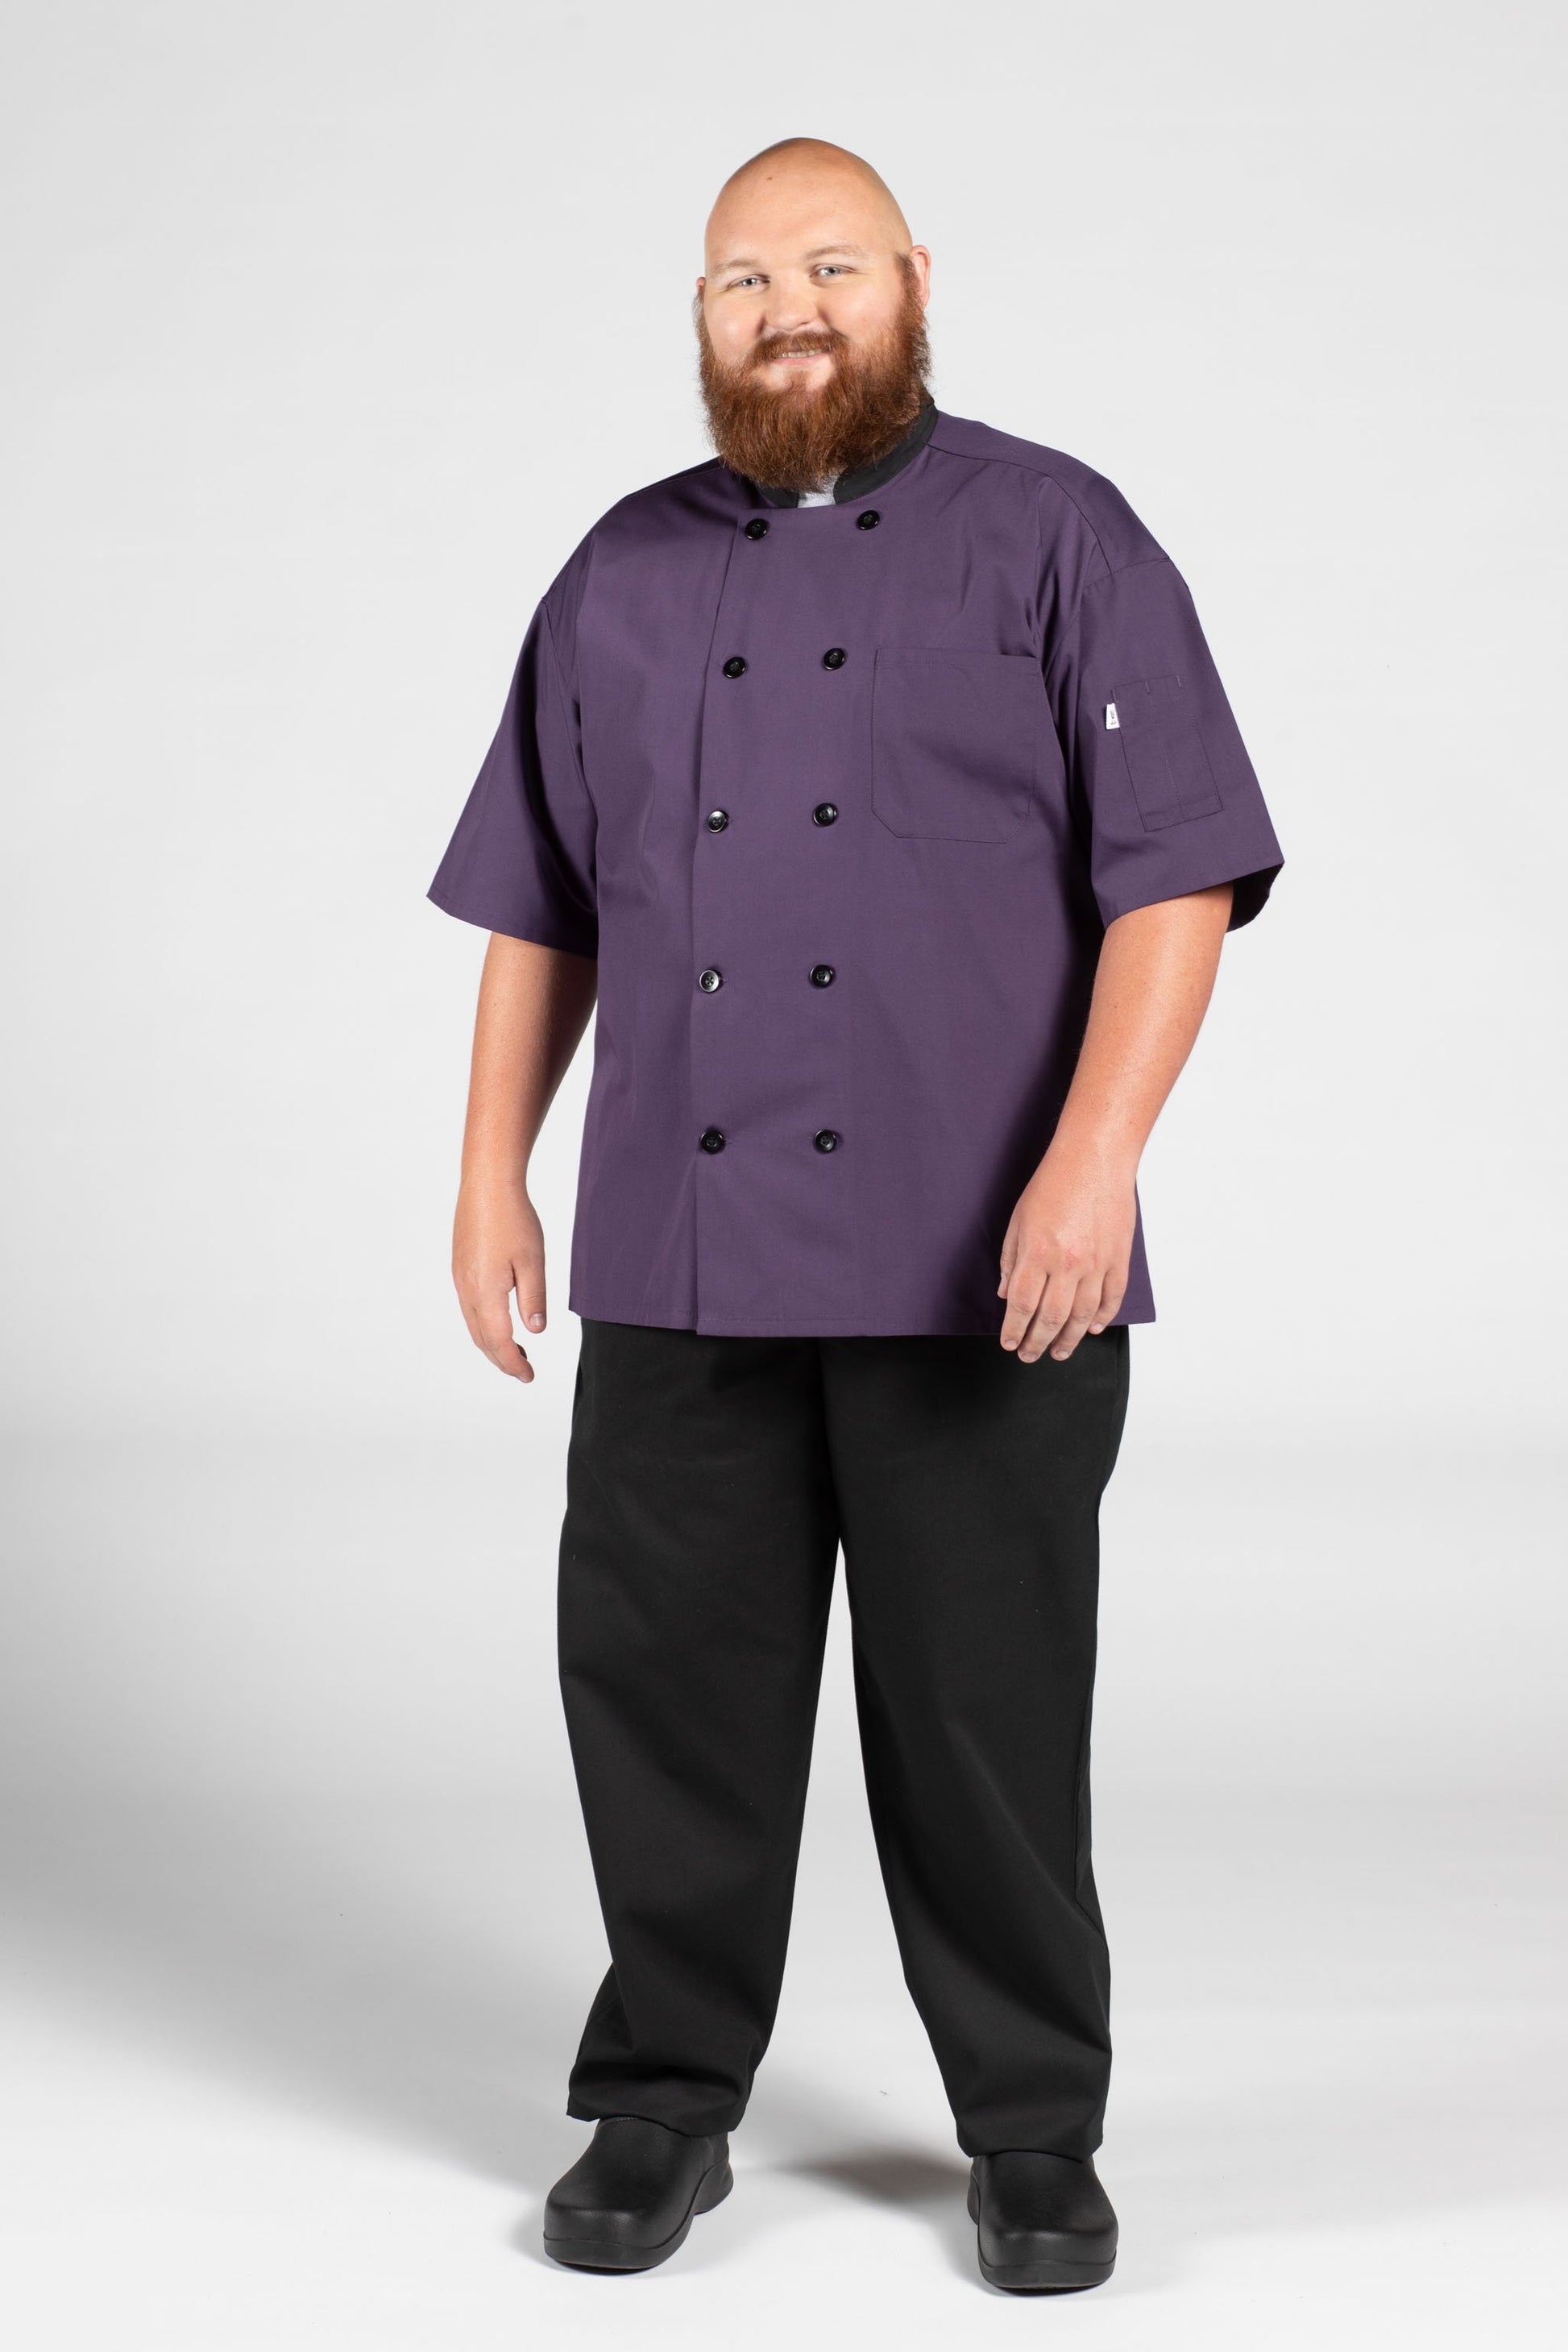 Donut Box Chef Pant  MEALS Clothing – meals